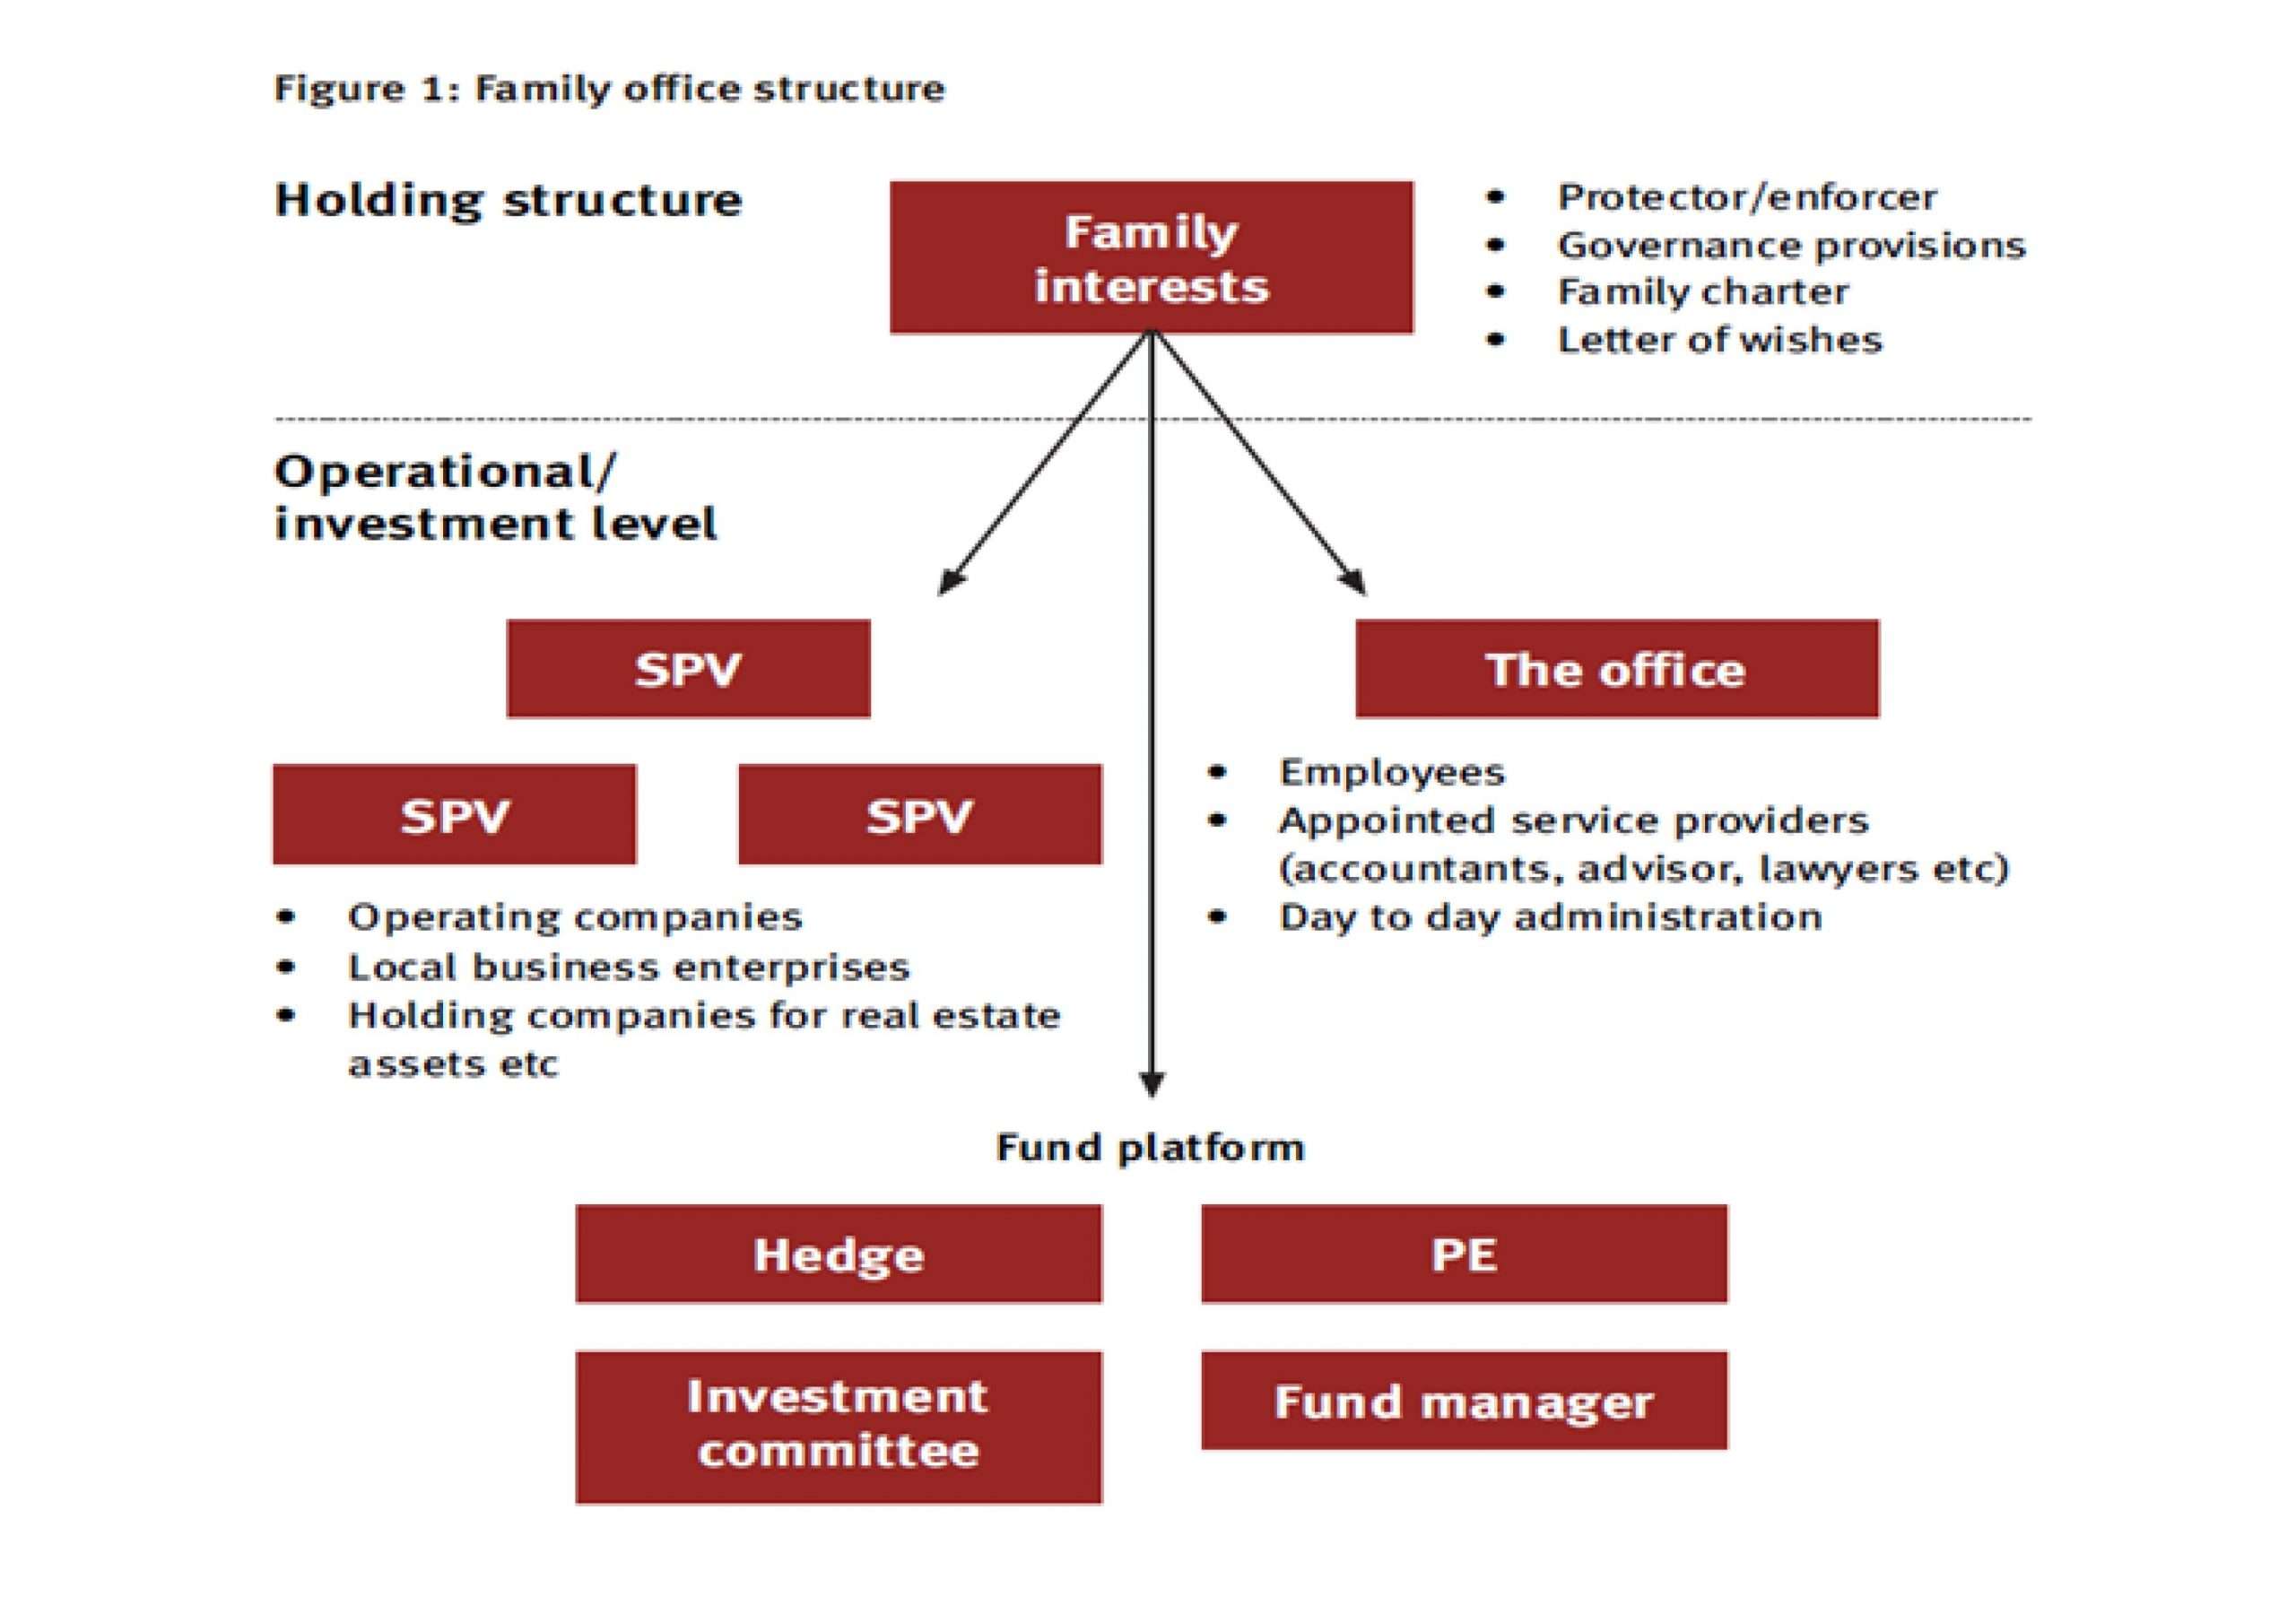 Family offices in Asia